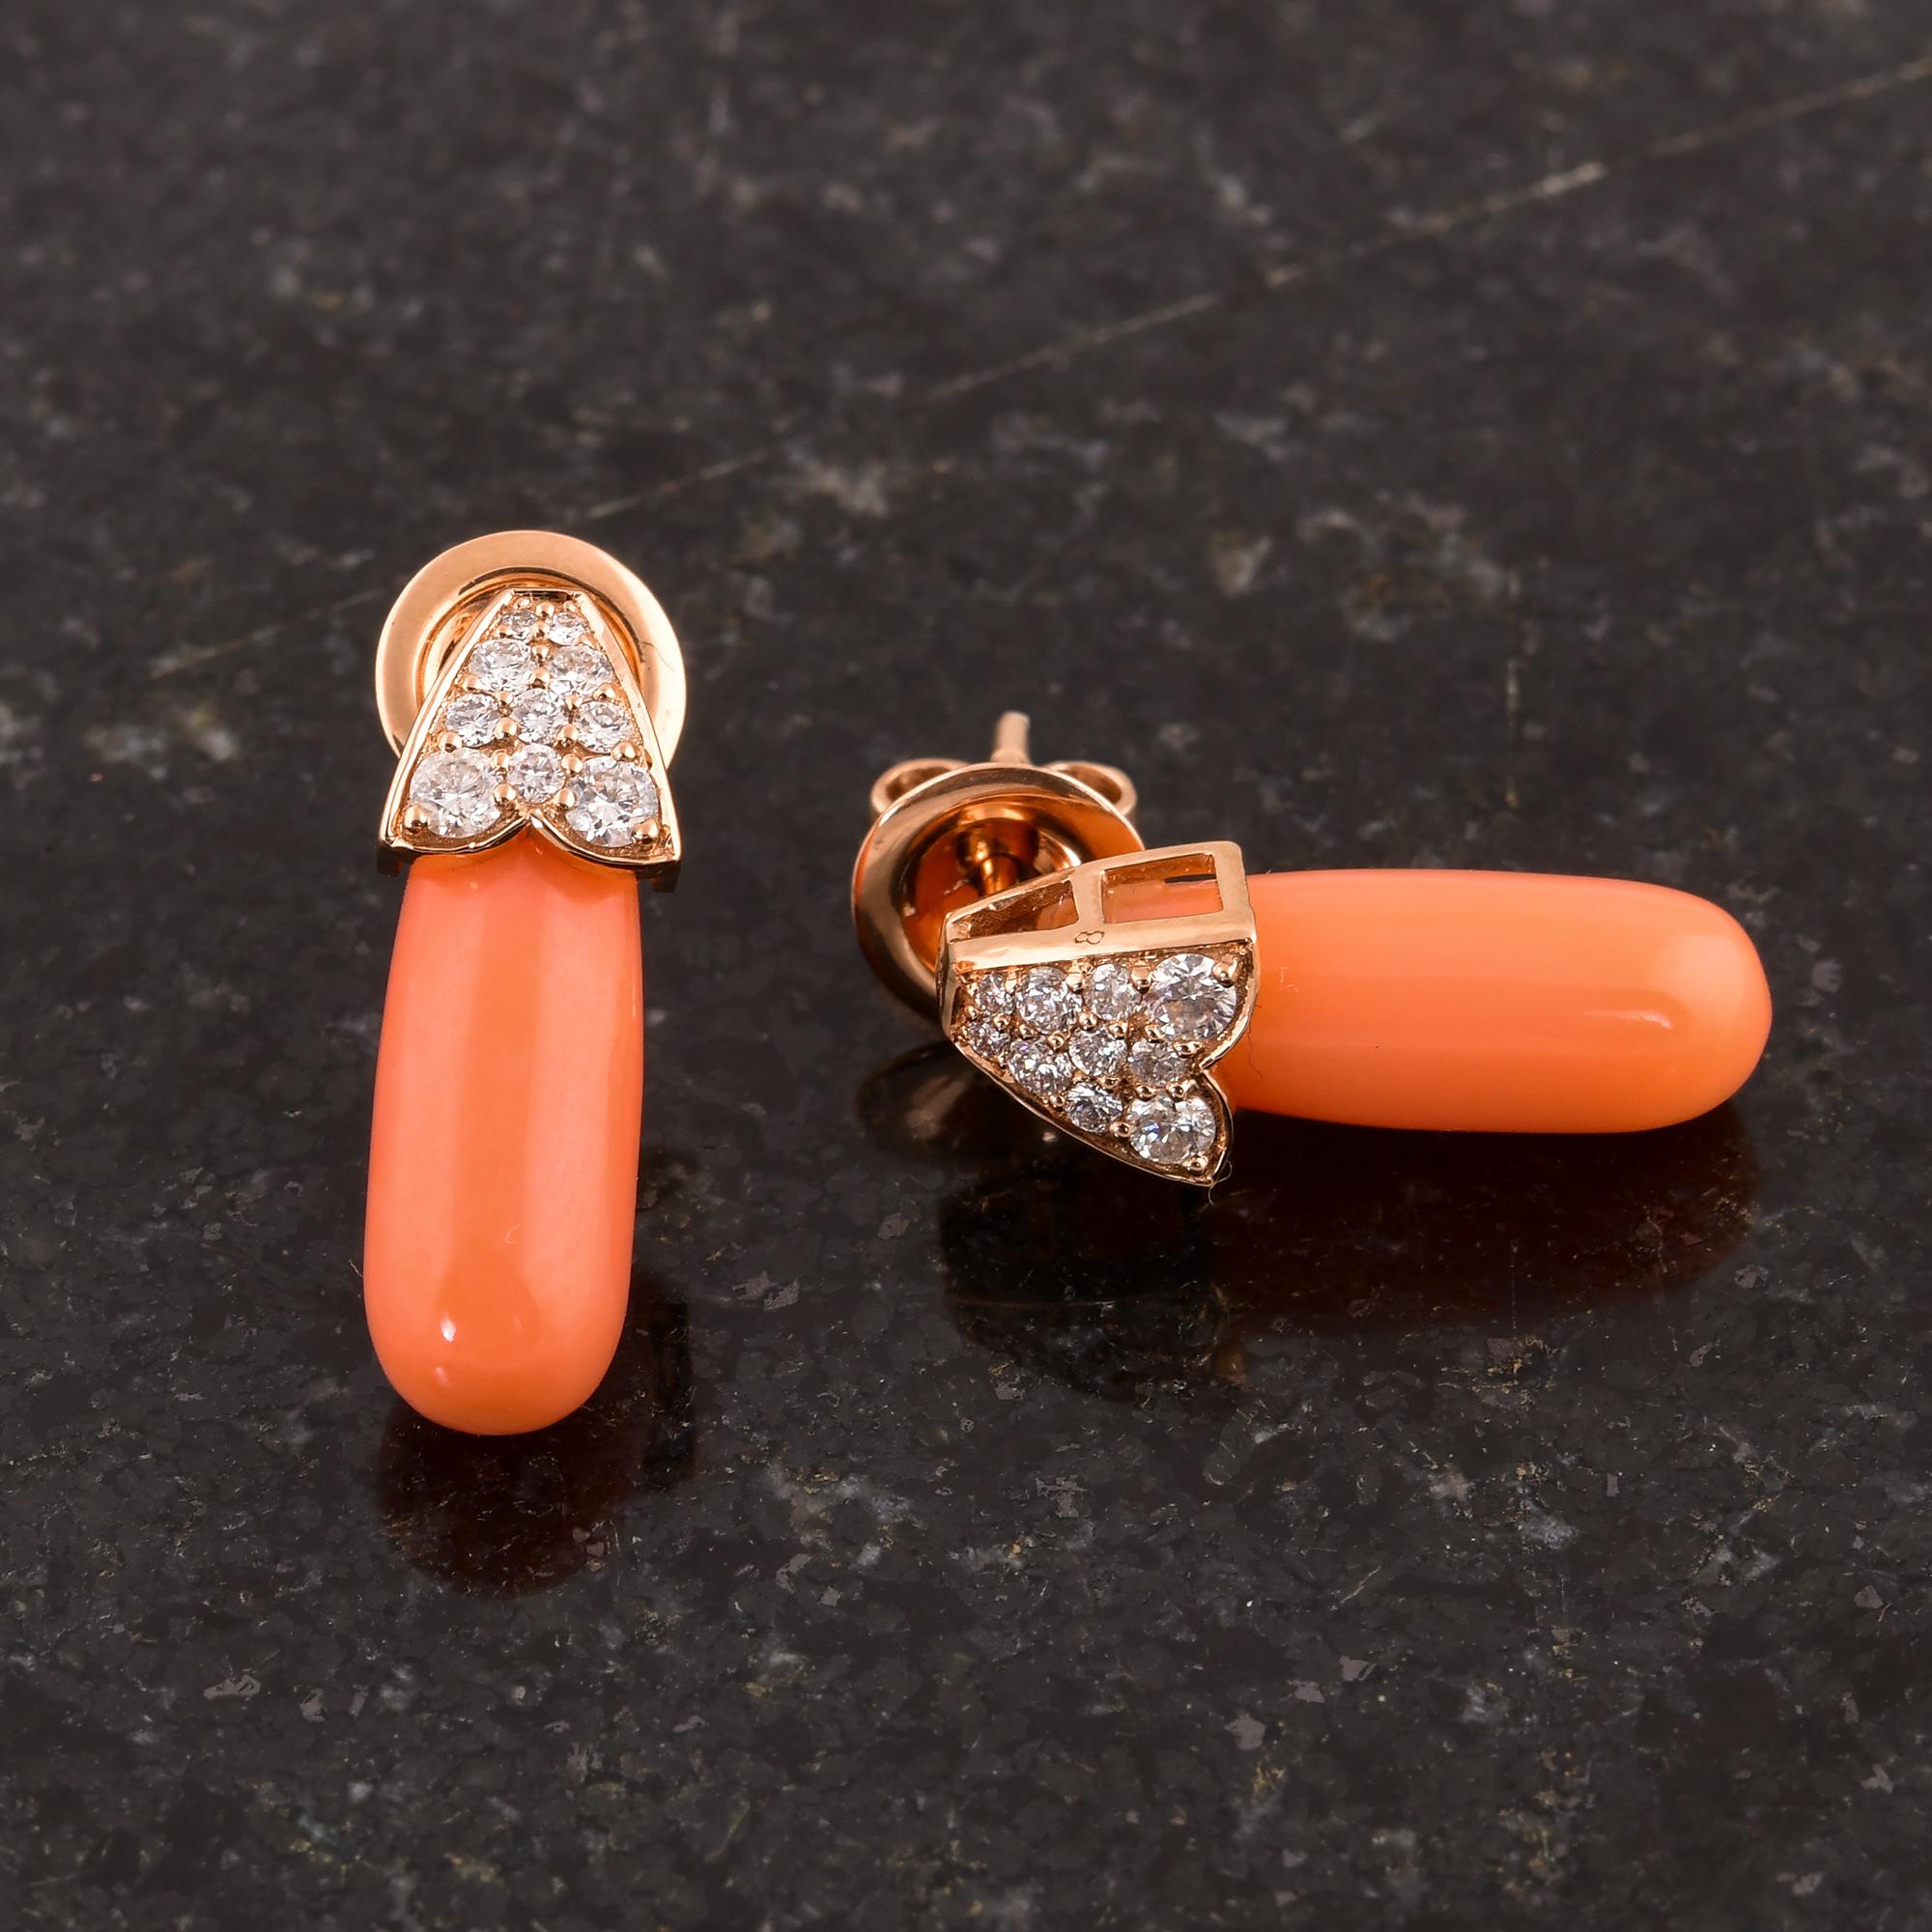 Round Cut Coral Gemstone Earrings 14 Karat Rose Gold SI Clarity HI Color Diamond Jewelry For Sale